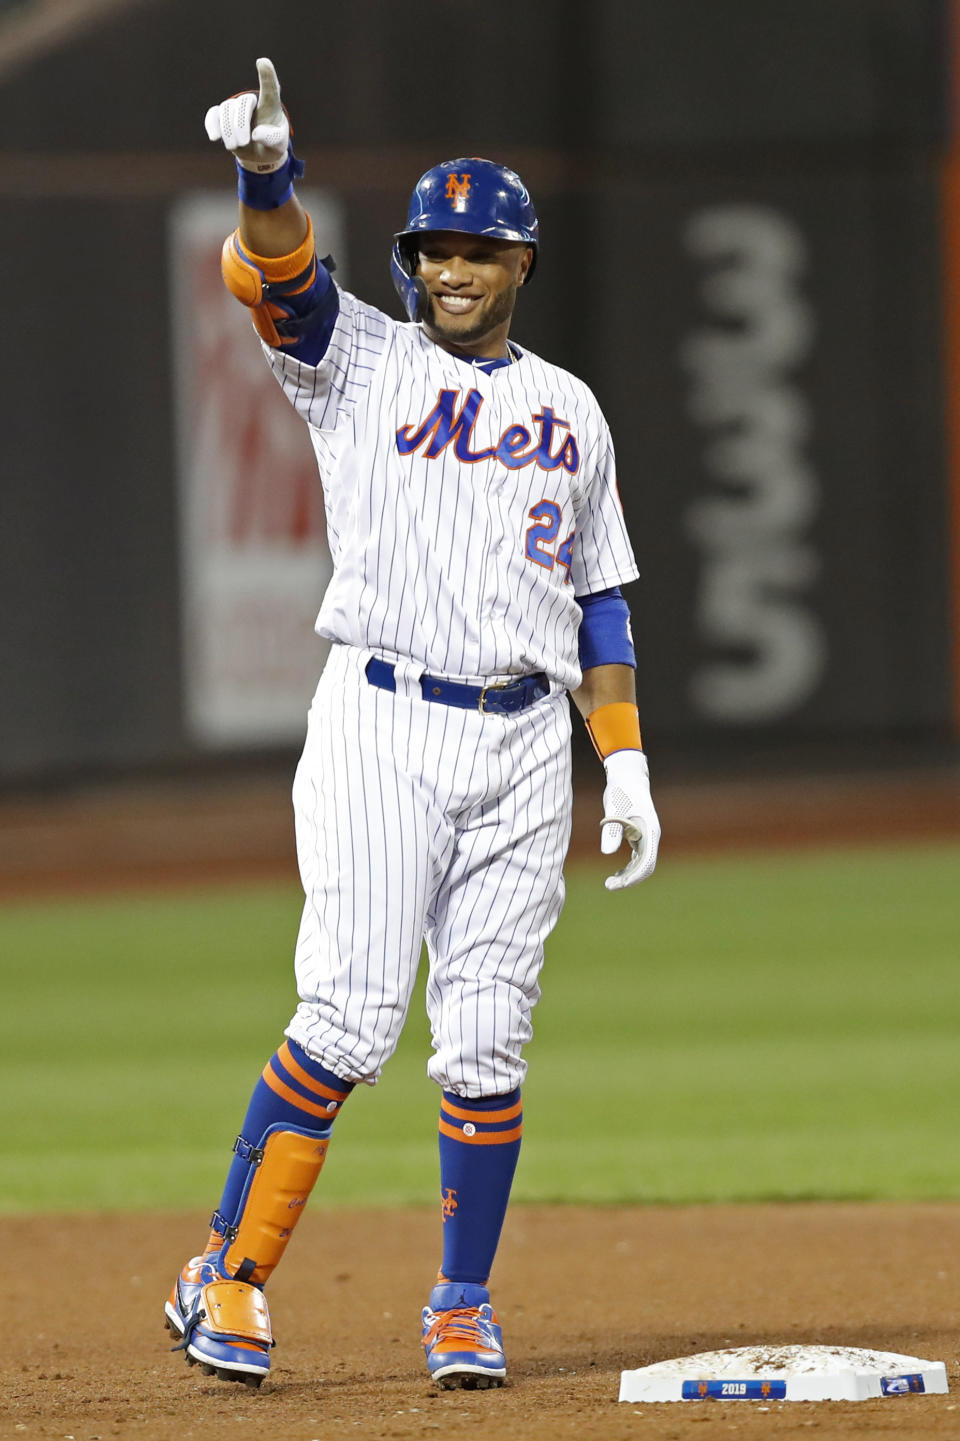 New York Mets' Robinson Cano gestures toward the Mets' dugout after hitting a double during the third inning of the team's baseball game against the Miami Marlins, Wednesday, Sept. 25, 2019, in New York. (AP Photo/Kathy Willens)